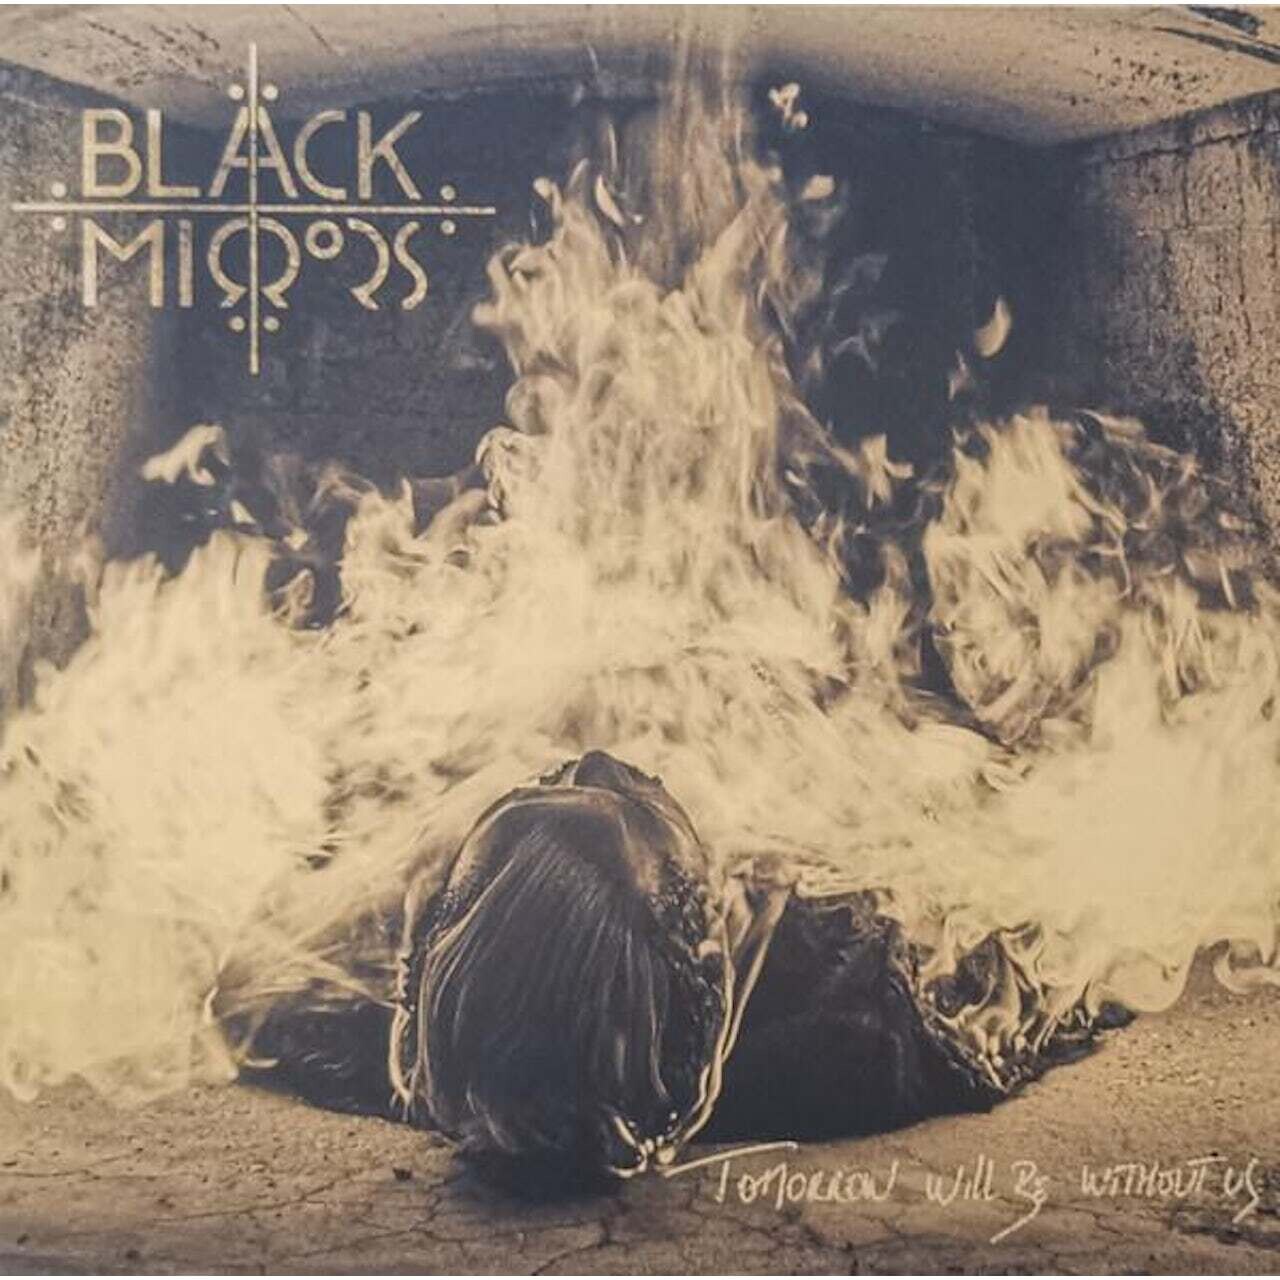 Black Mirrors / Tomorrow Will Be Without Us